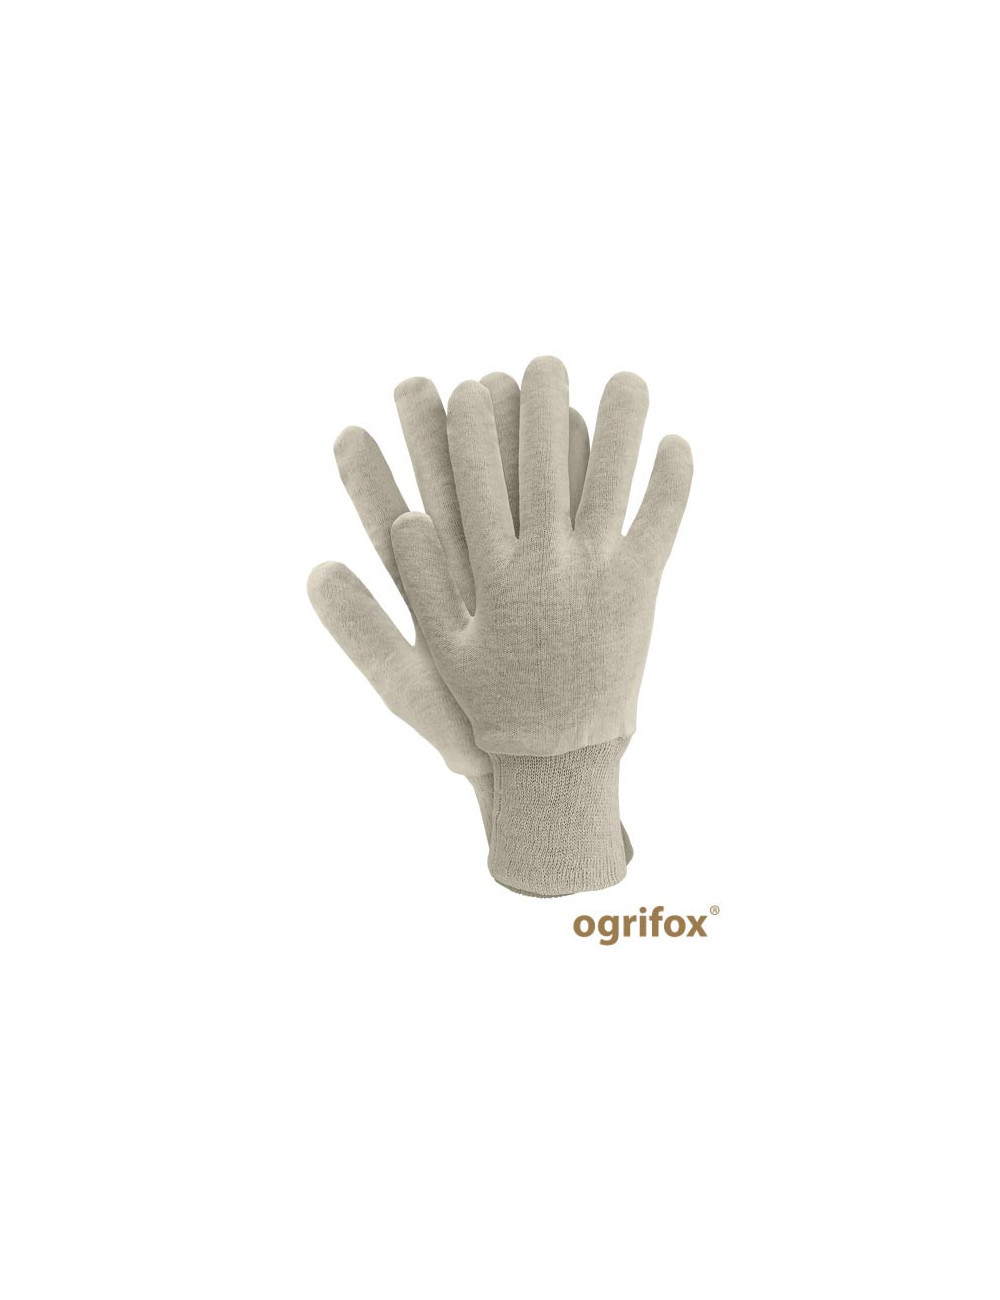 Protective gloves ox.11.711 unders ox-unders e ecru Ogrifox